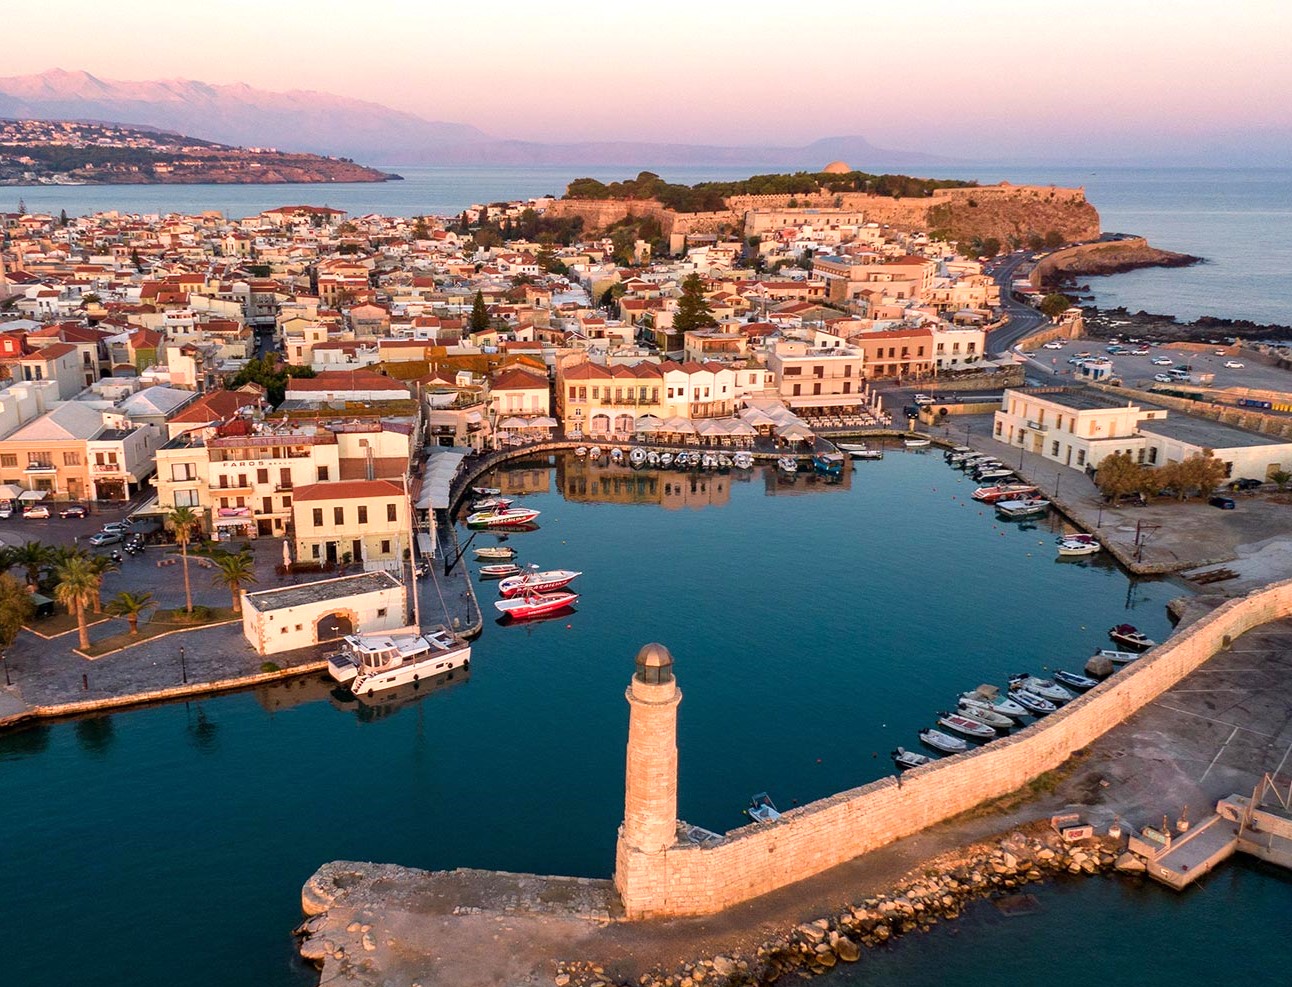 Rethymno port with a lighthouse and moored boats, overlooking the town and Venetian Fortezza Castle.